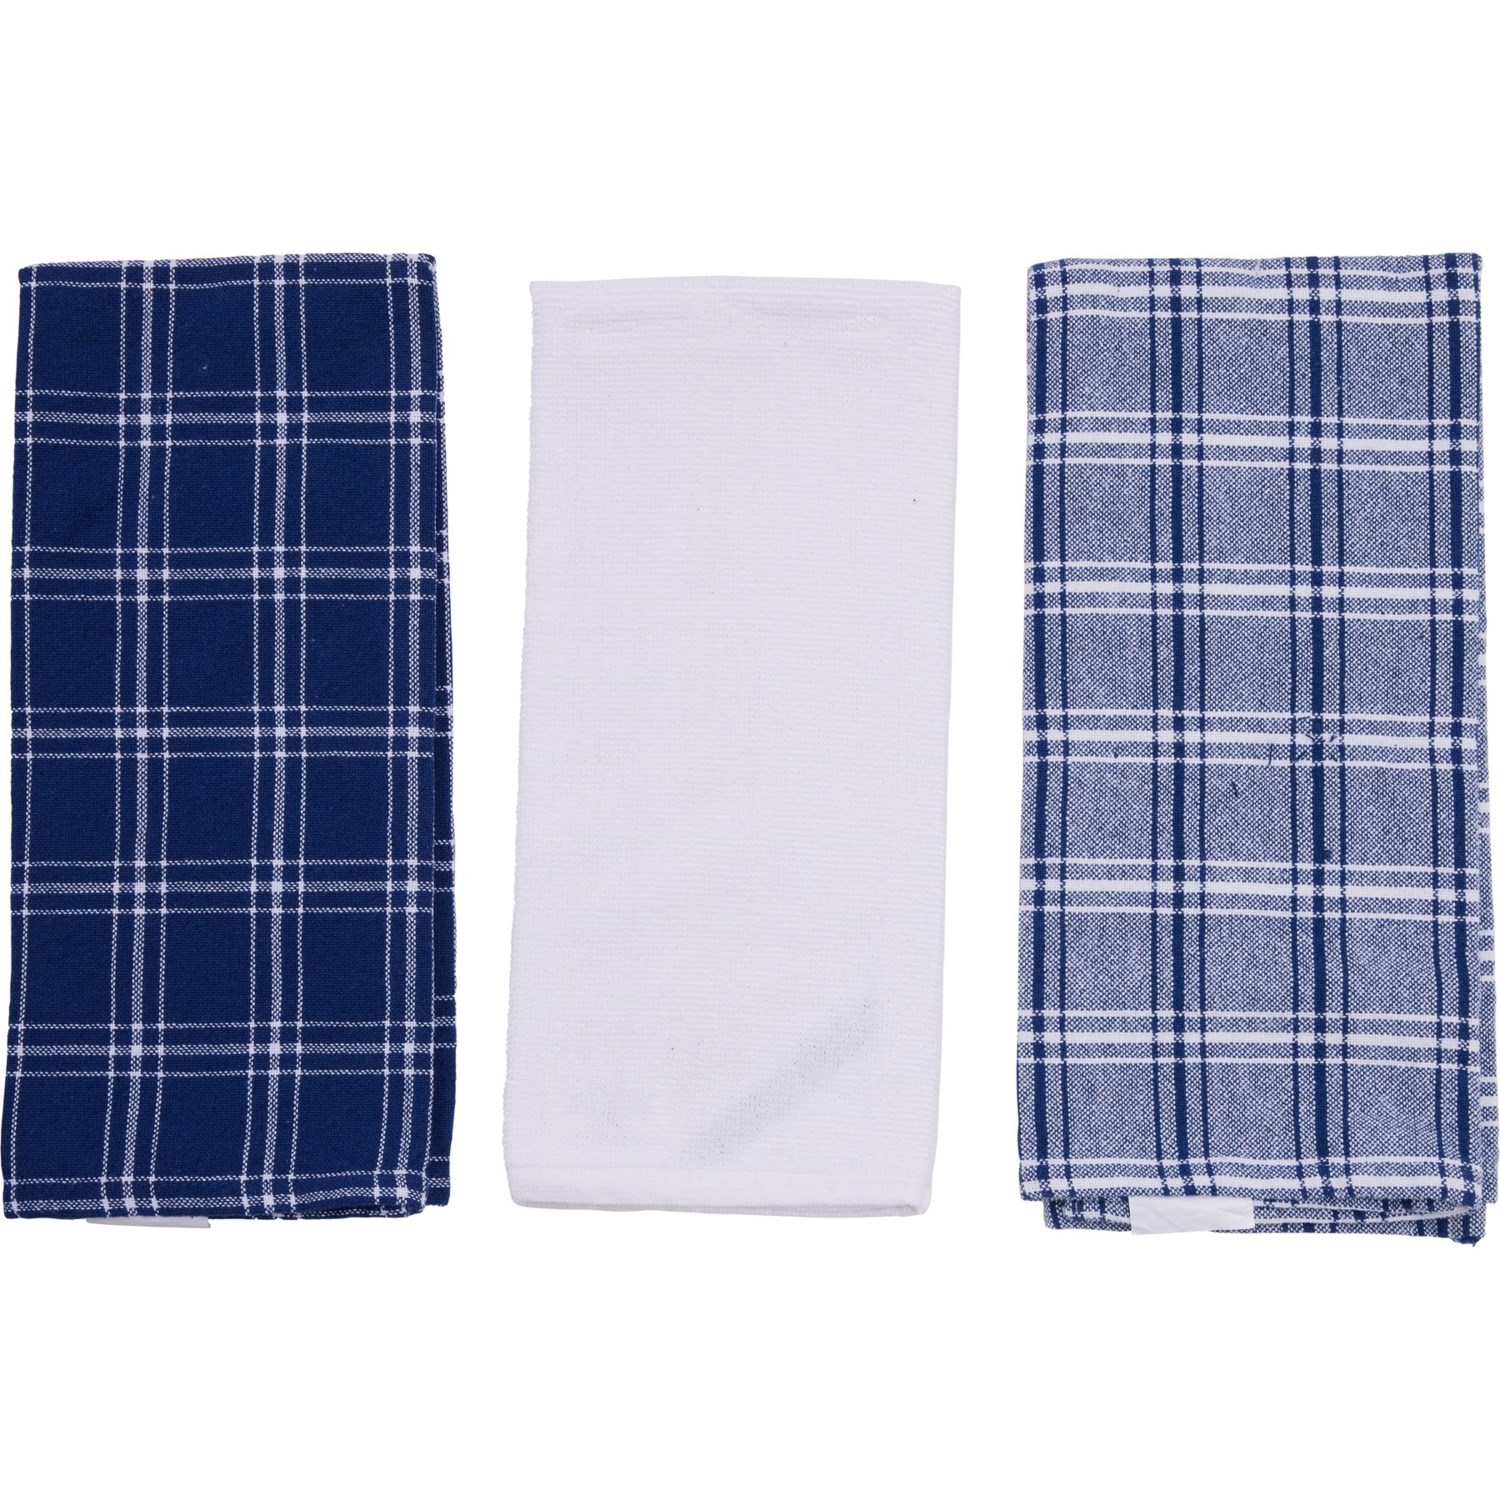 https://i.stpost.com/the-good-cook-stonewashed-terry-kitchen-towels-3-pack-18x28-in-denim~p~3hmph_01~1500.2.jpg